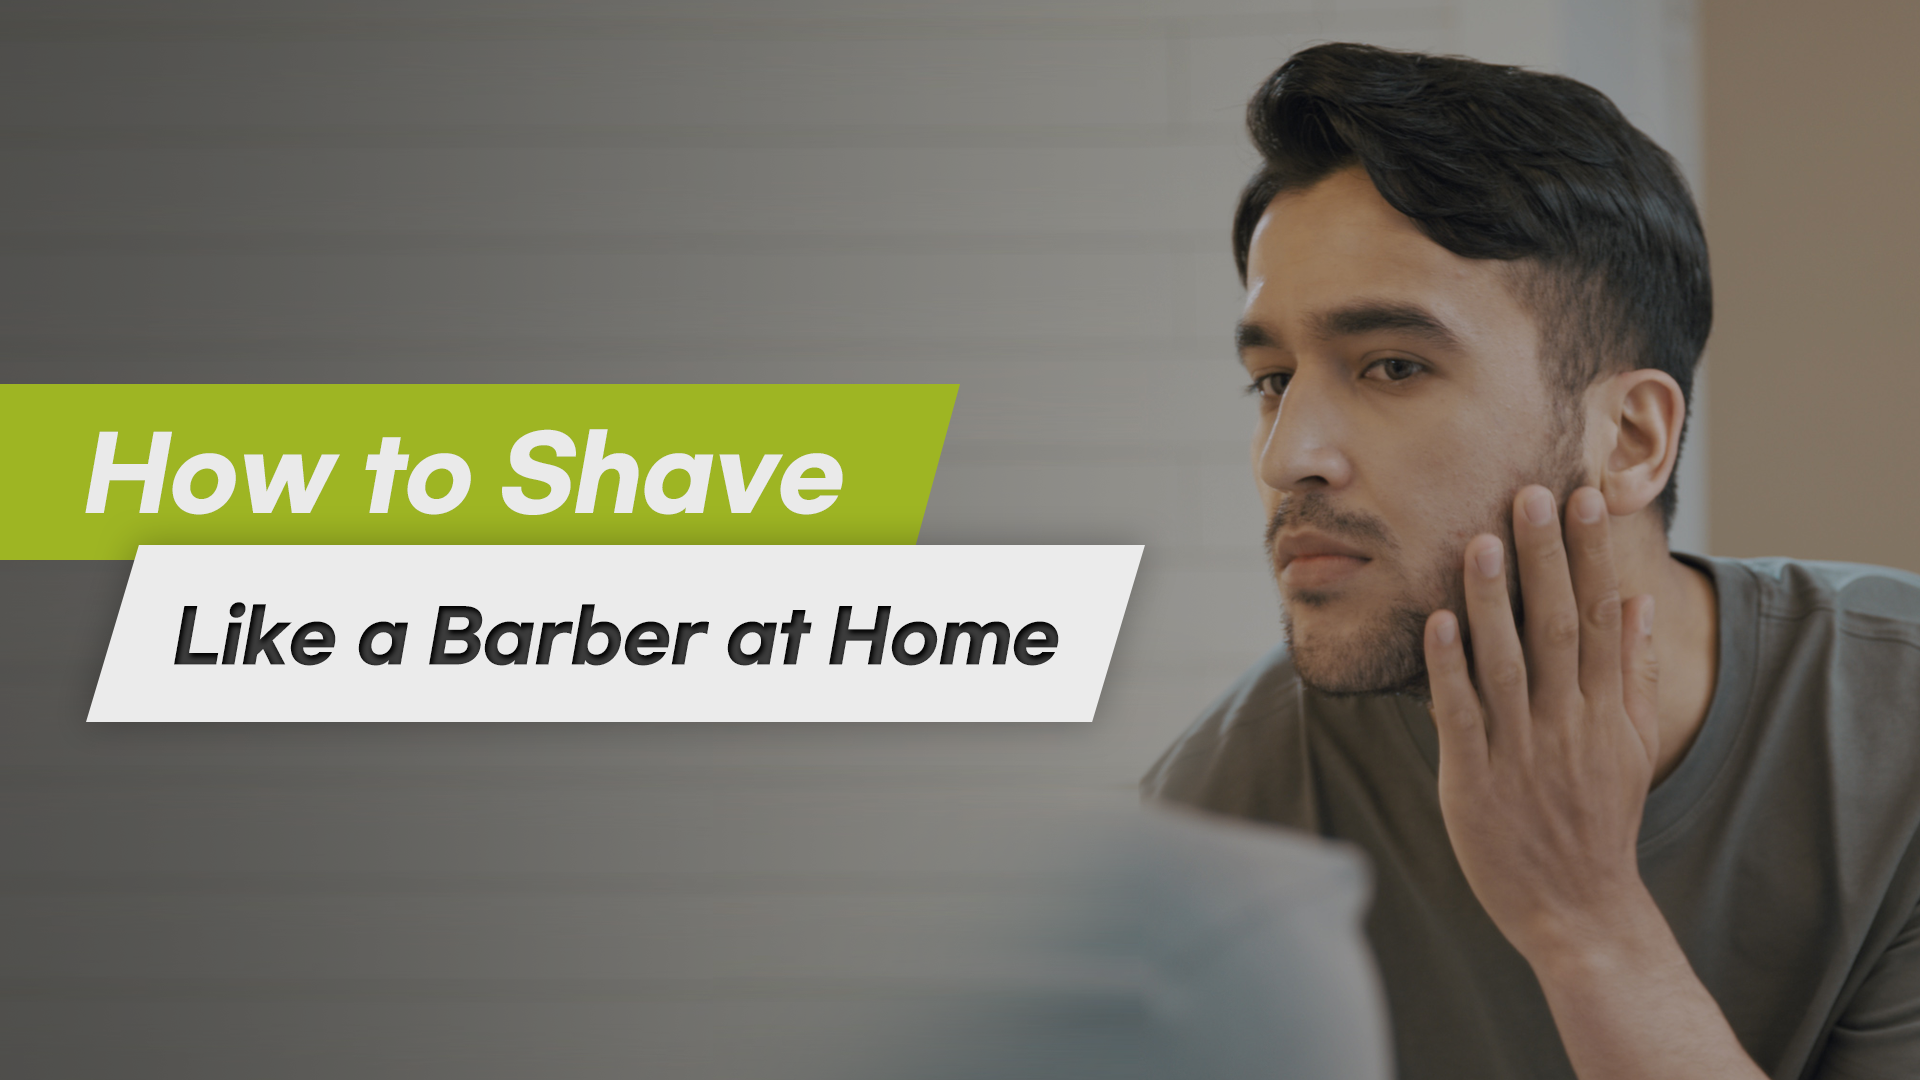 Shaving Story: How to Shave Like a Barber at Home